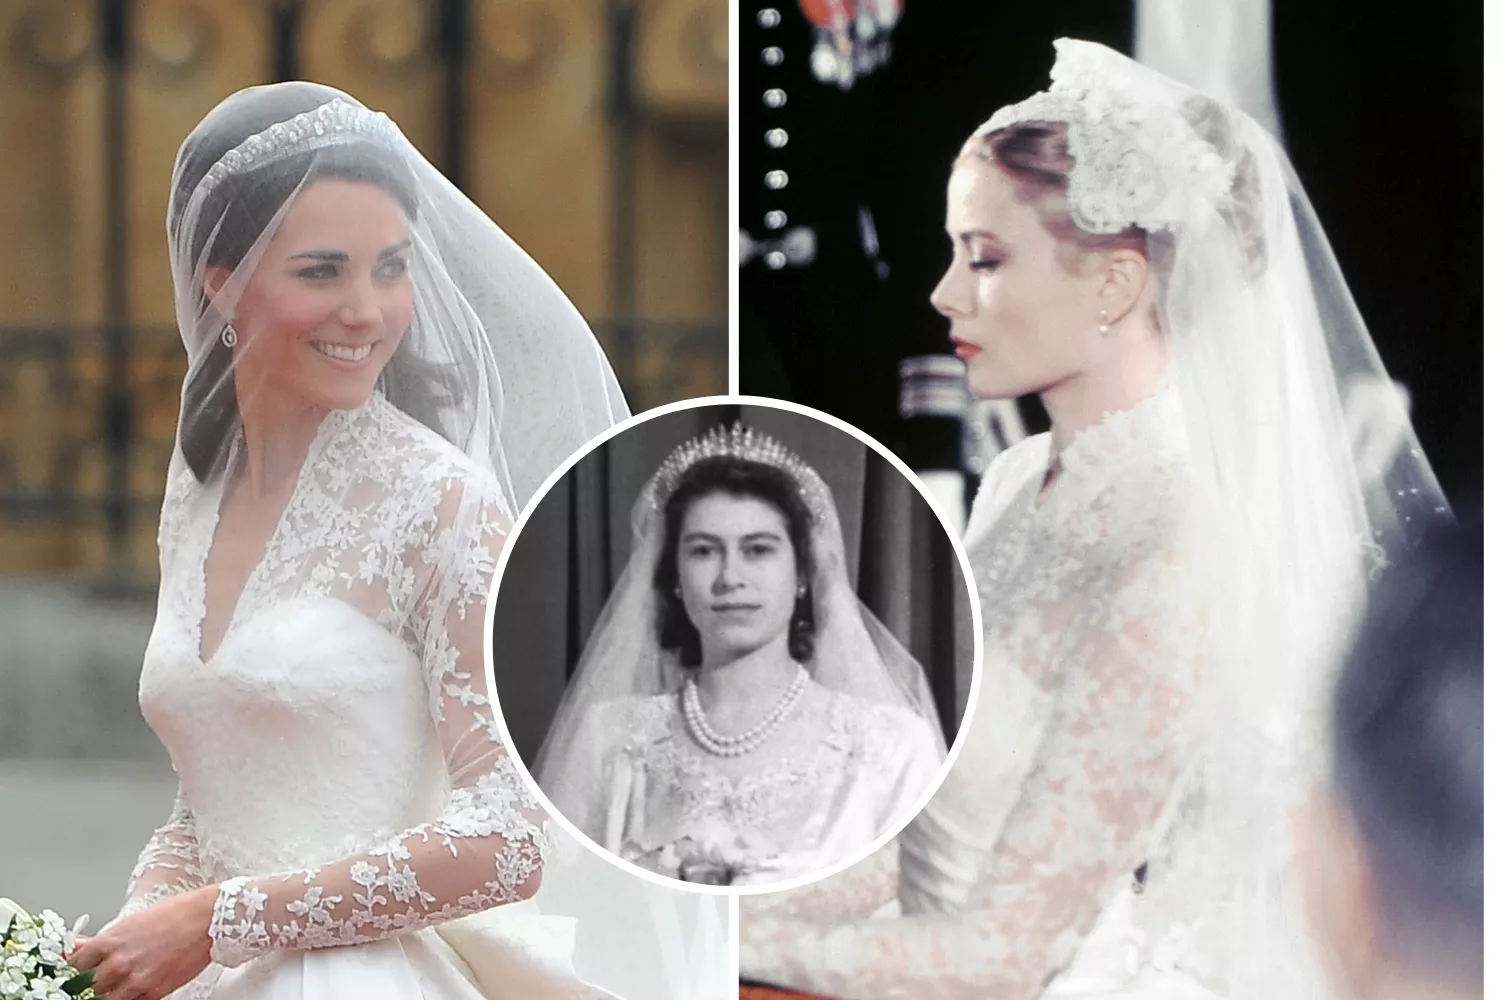 Royal Wedding Rewind: A Closer Look At Kate Middleton's Wedding Gown